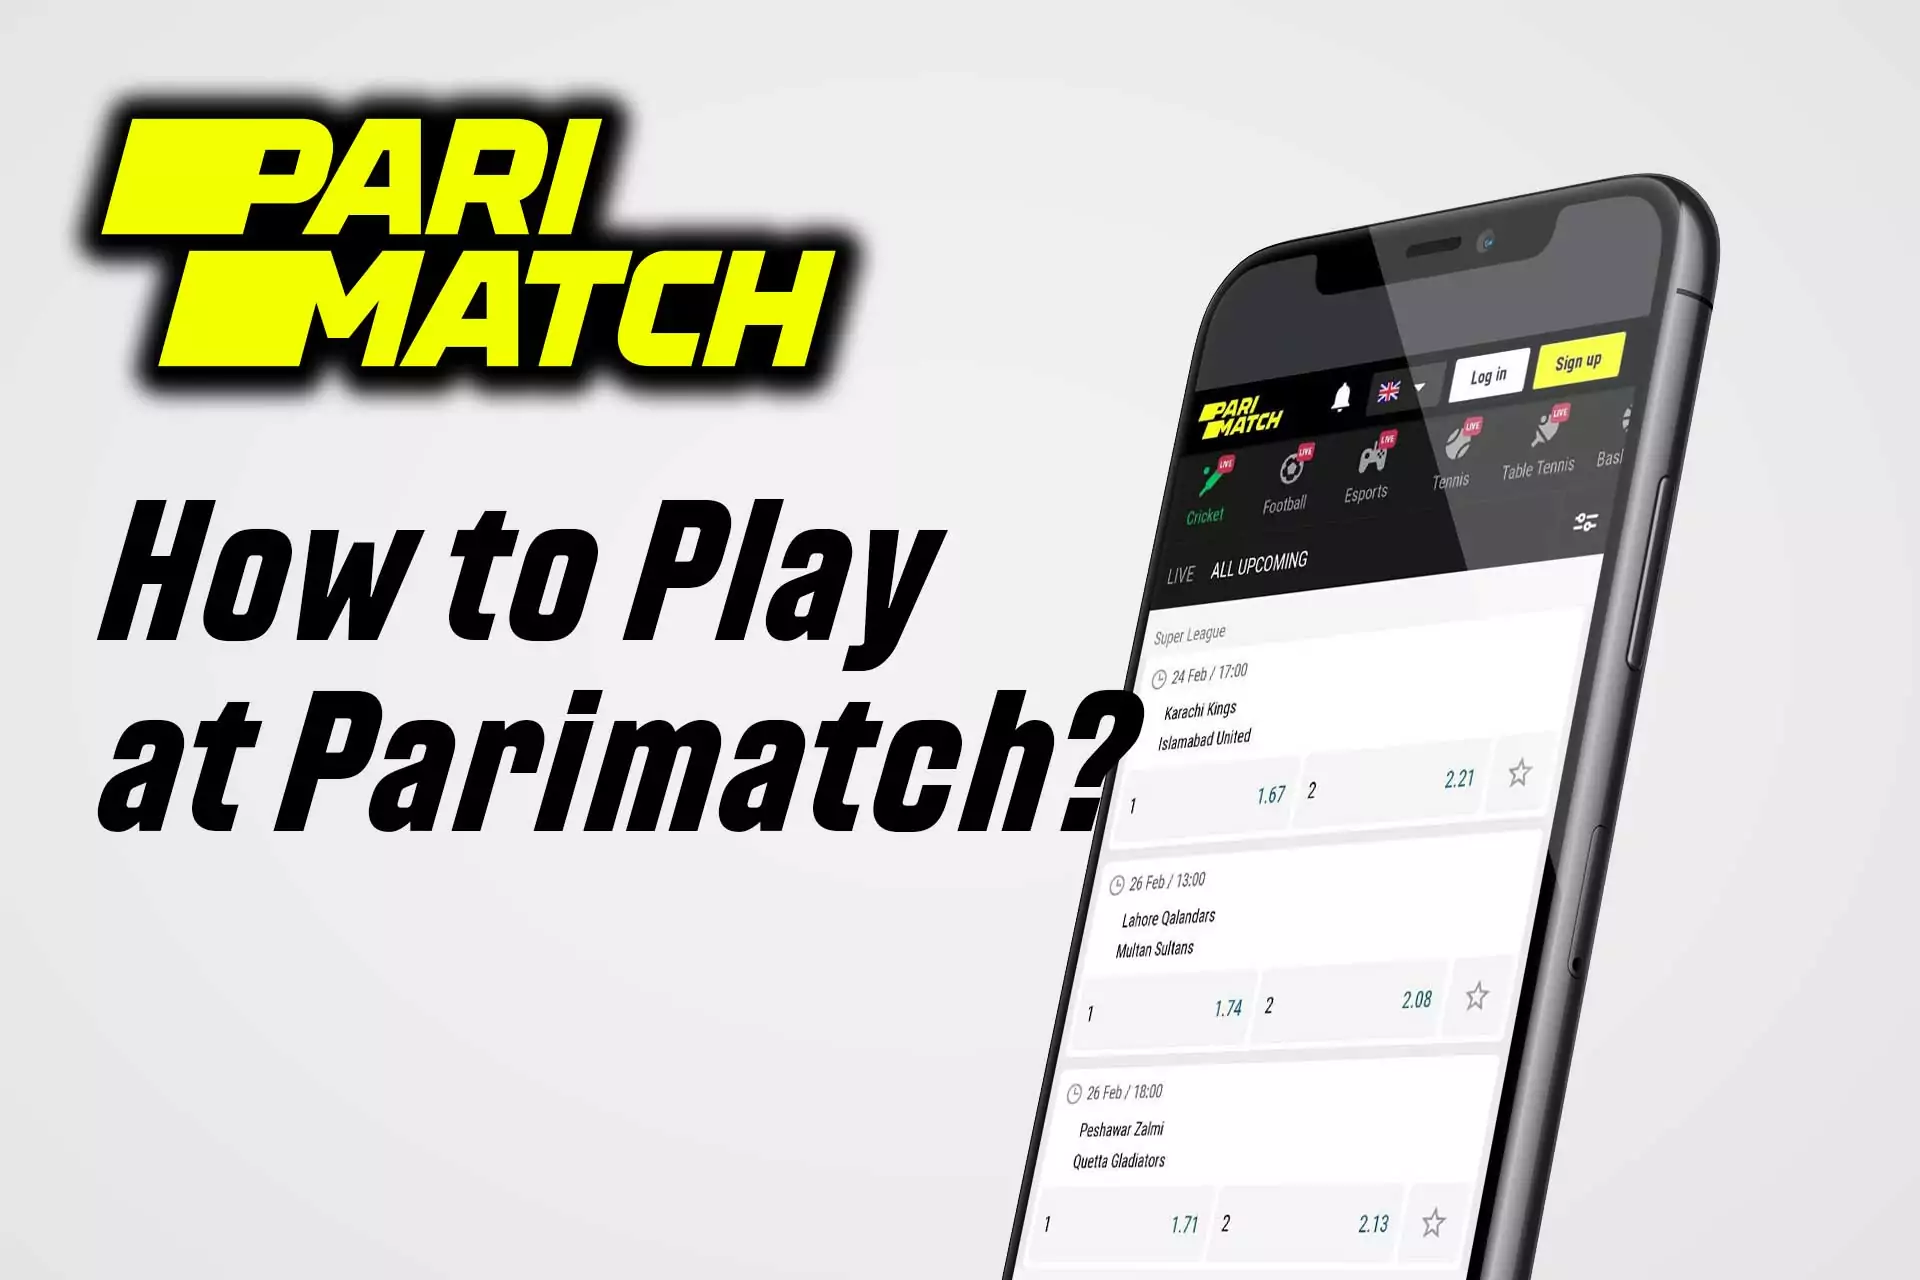 Sign up for Parimatch, top up your account and start betting.